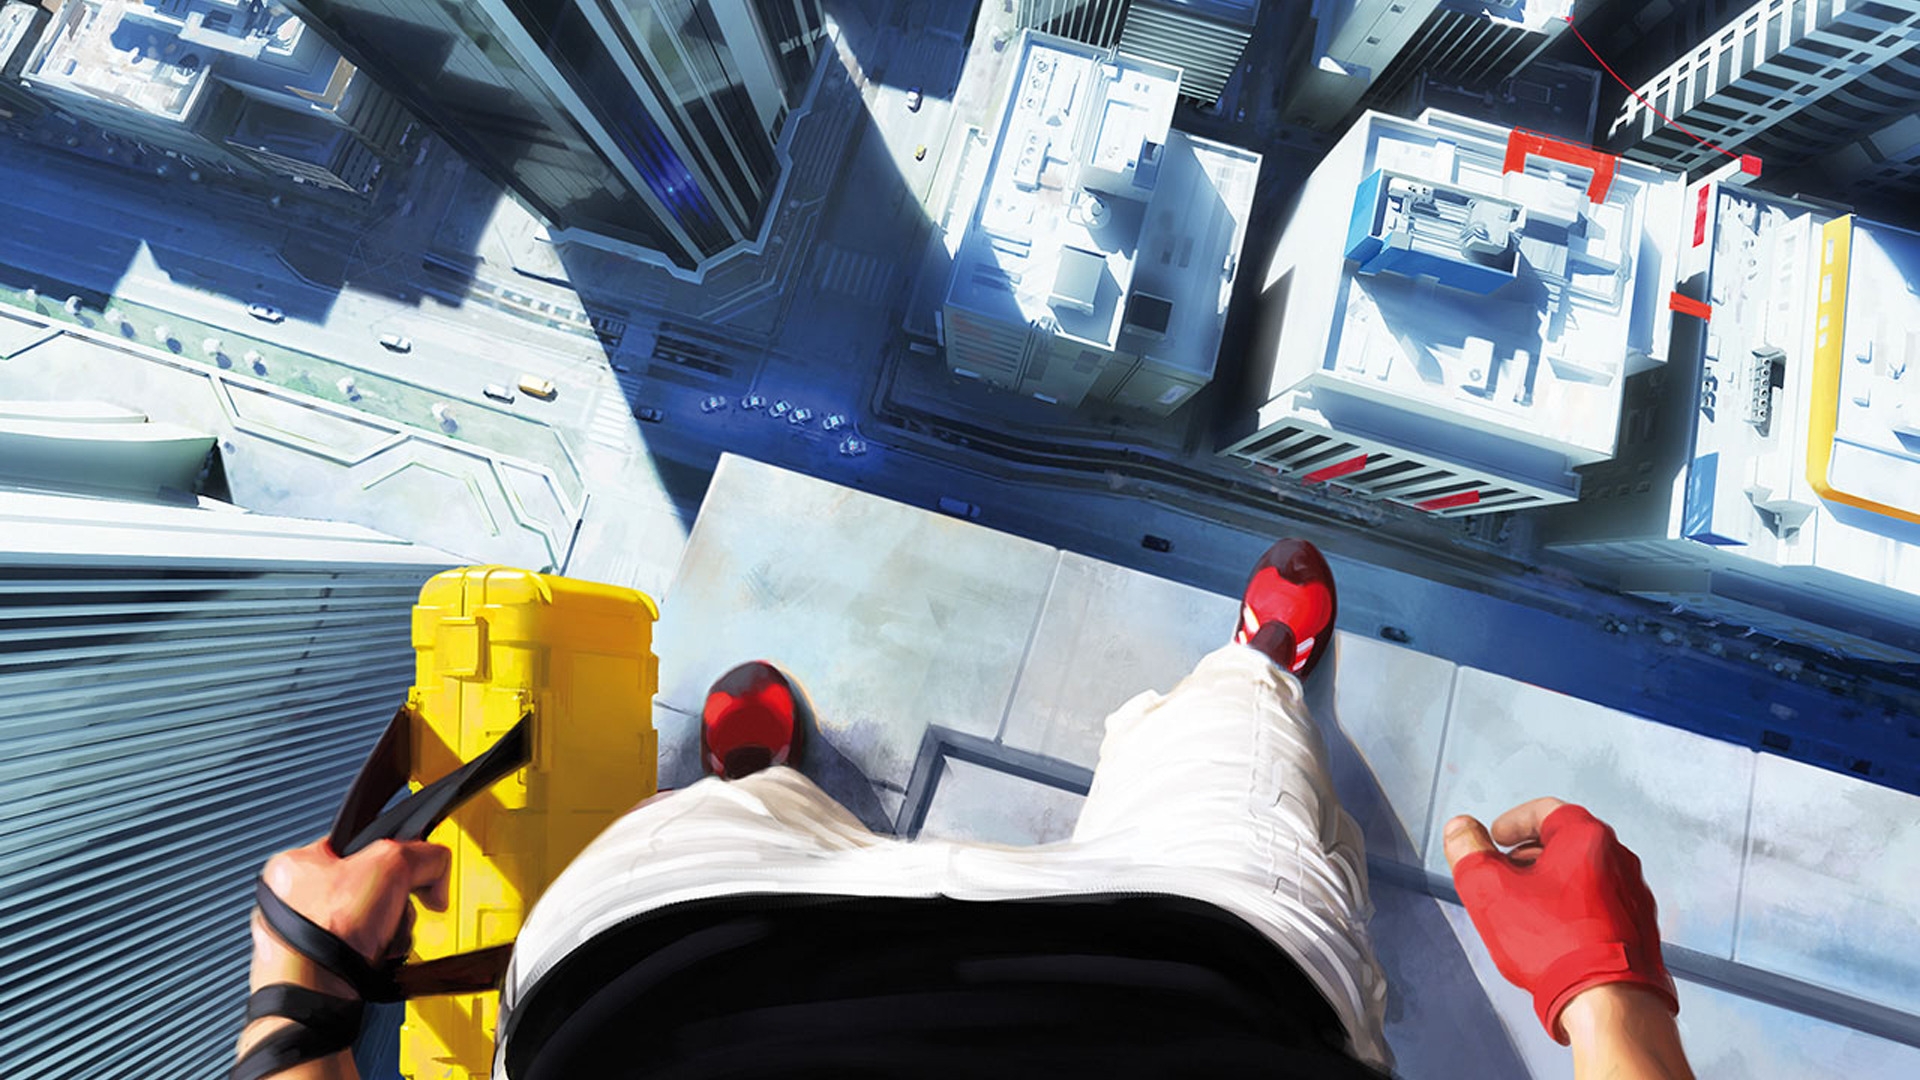 Mirrors Edge View for 1920 x 1080 HDTV 1080p resolution